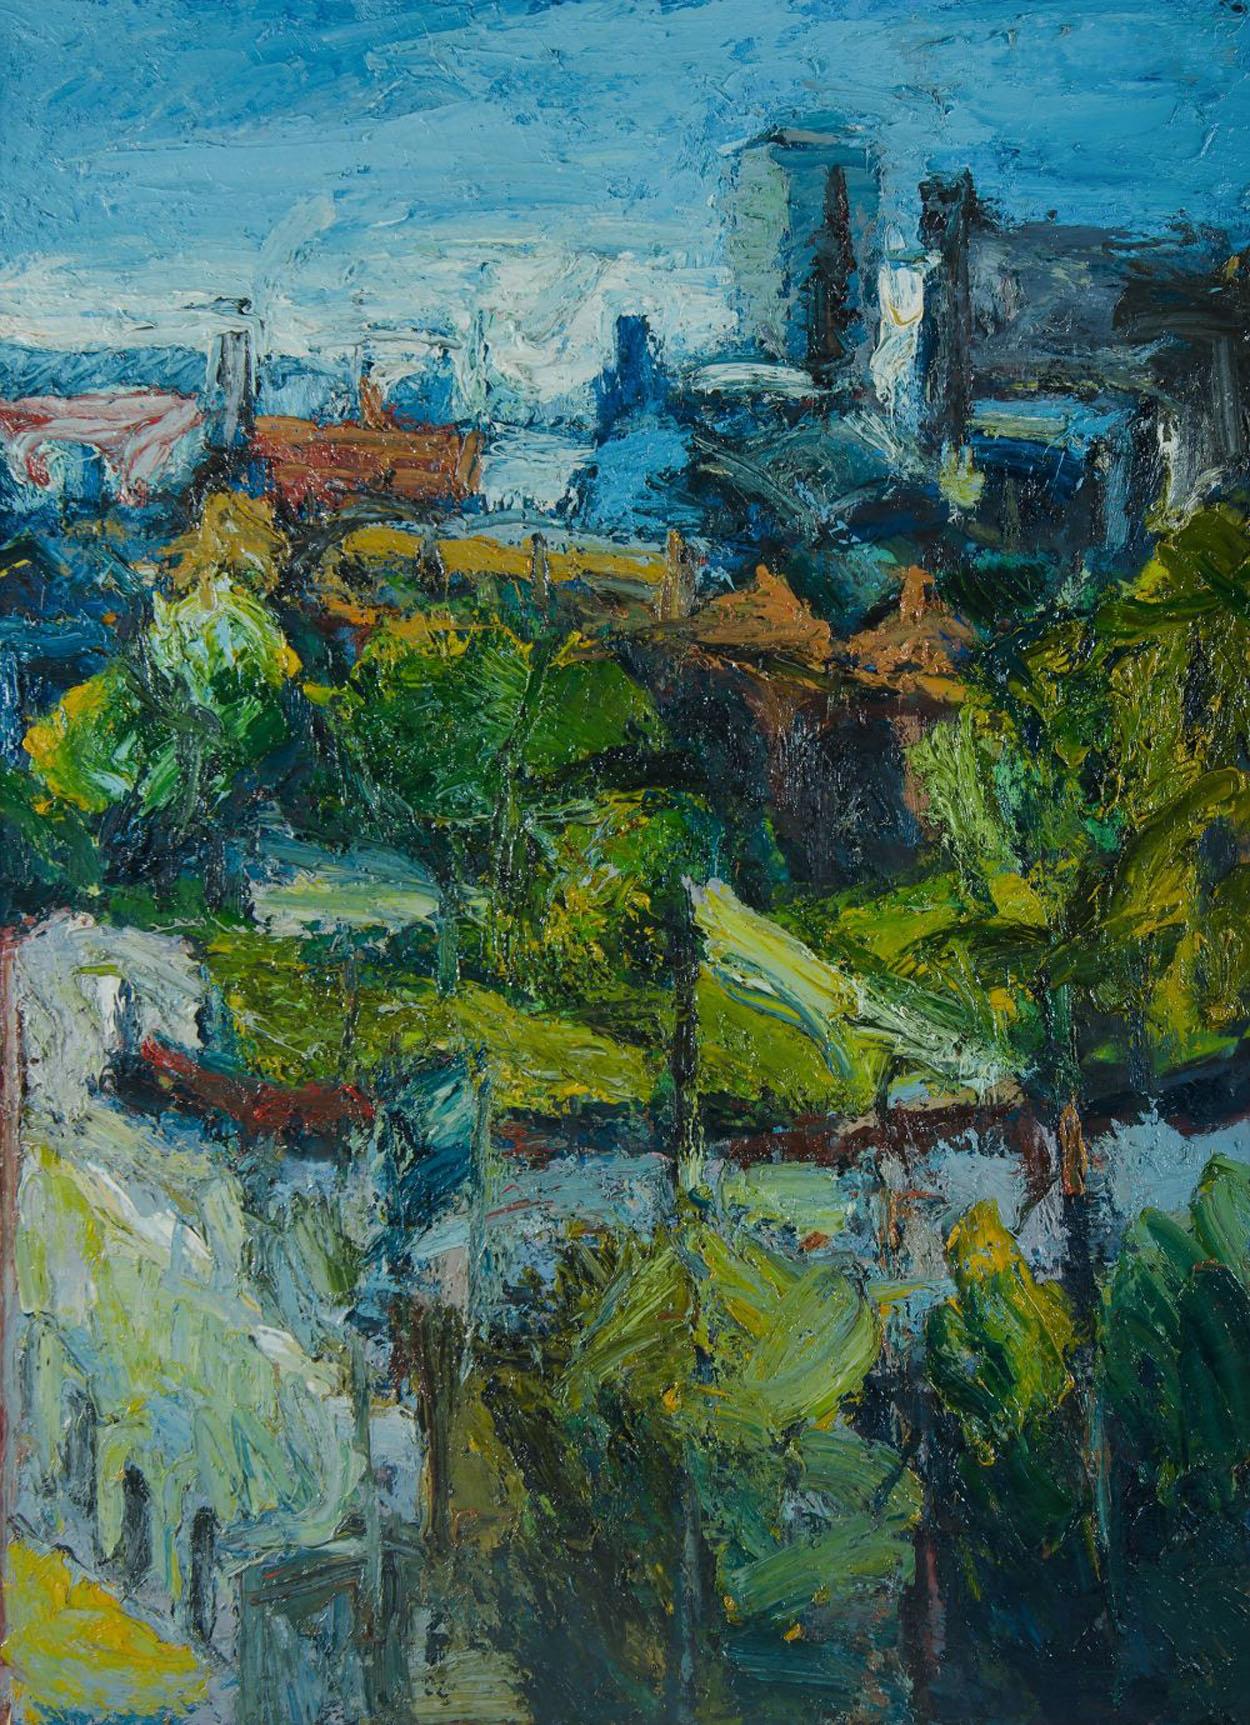 Jake Attree, (Born 1950) Yorkshire artist, view of leeds. Oil on canvas, signed and dated verso: J Attree, 1992
  
The subject is a view across the City of Leeds taken from the artists studio on Maris Street which has since been demolished to